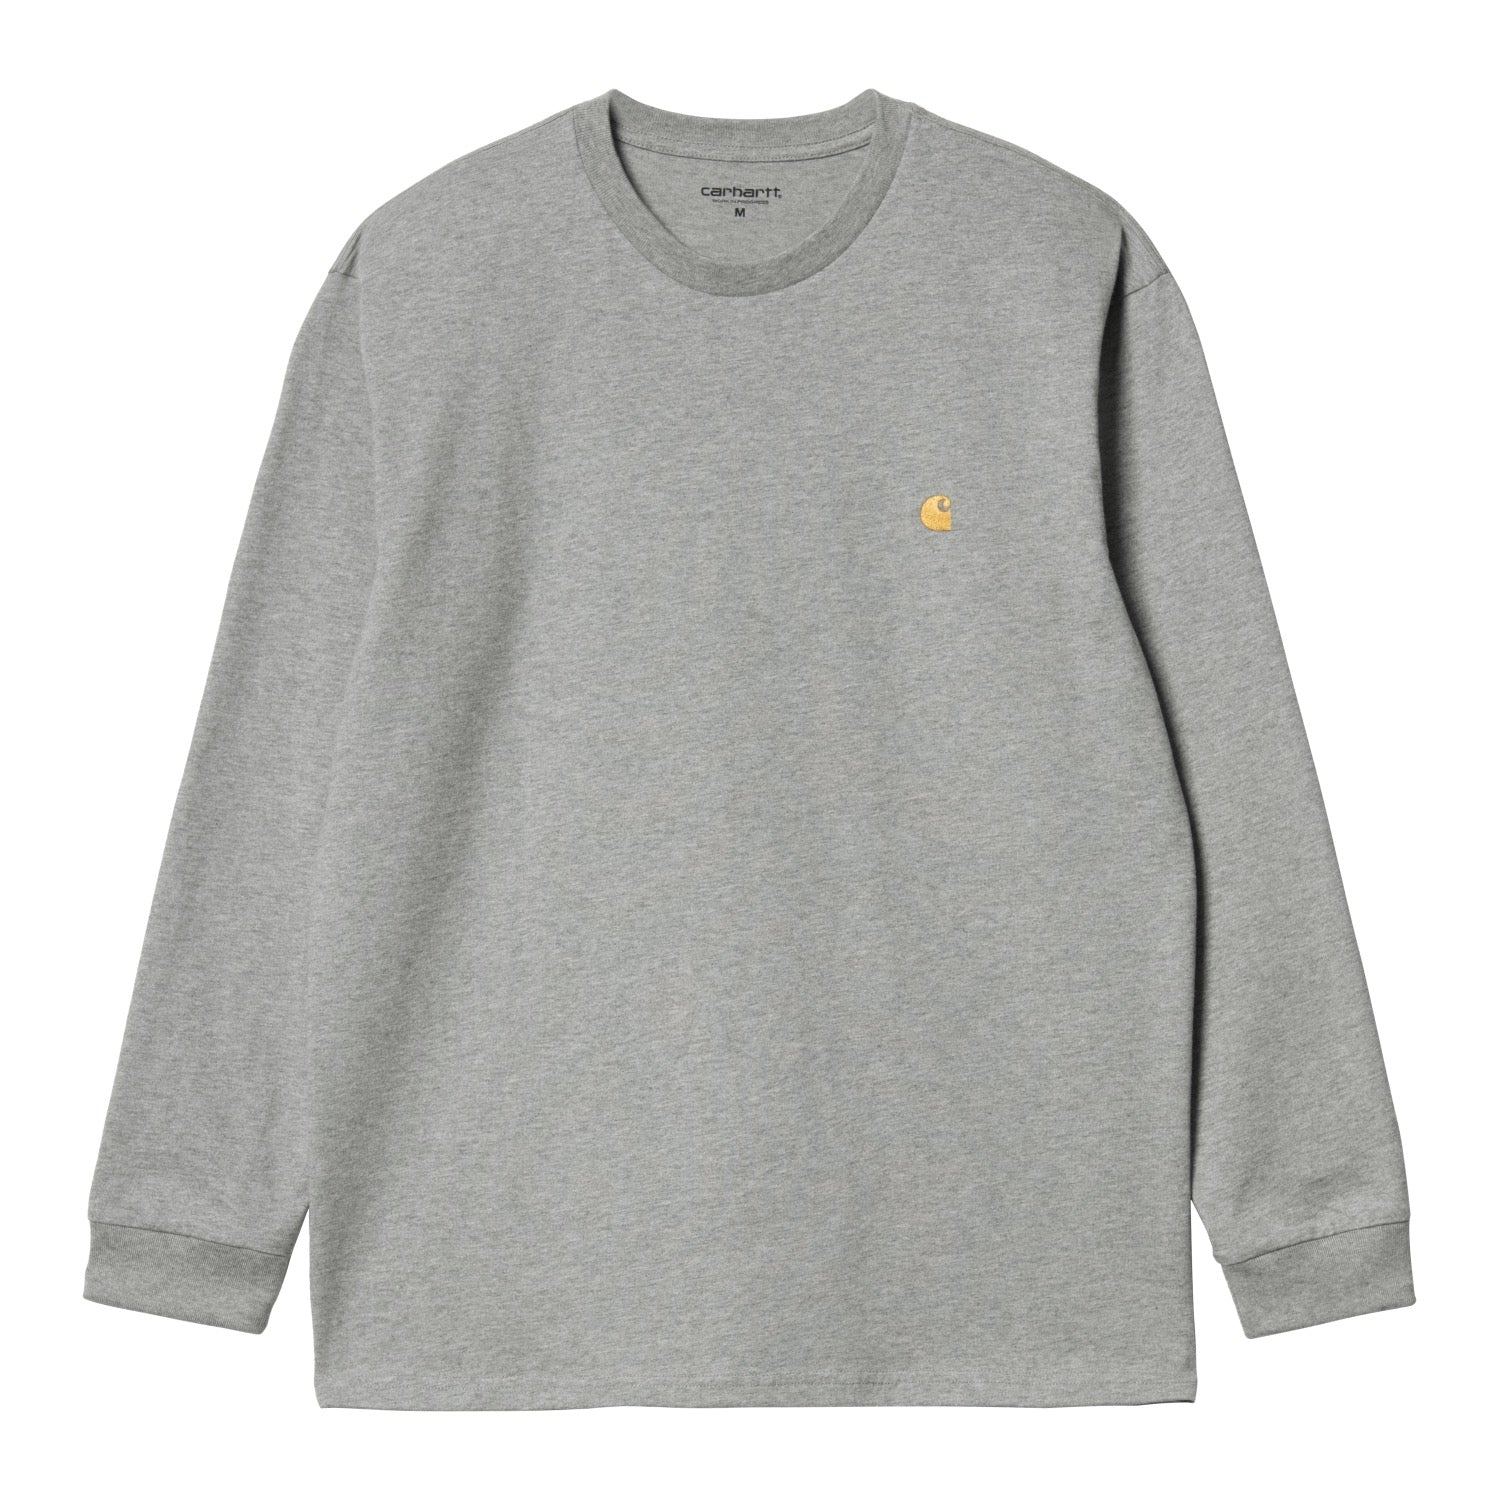 L/S CHASE T-SHIRT - Grey Heather / Gold